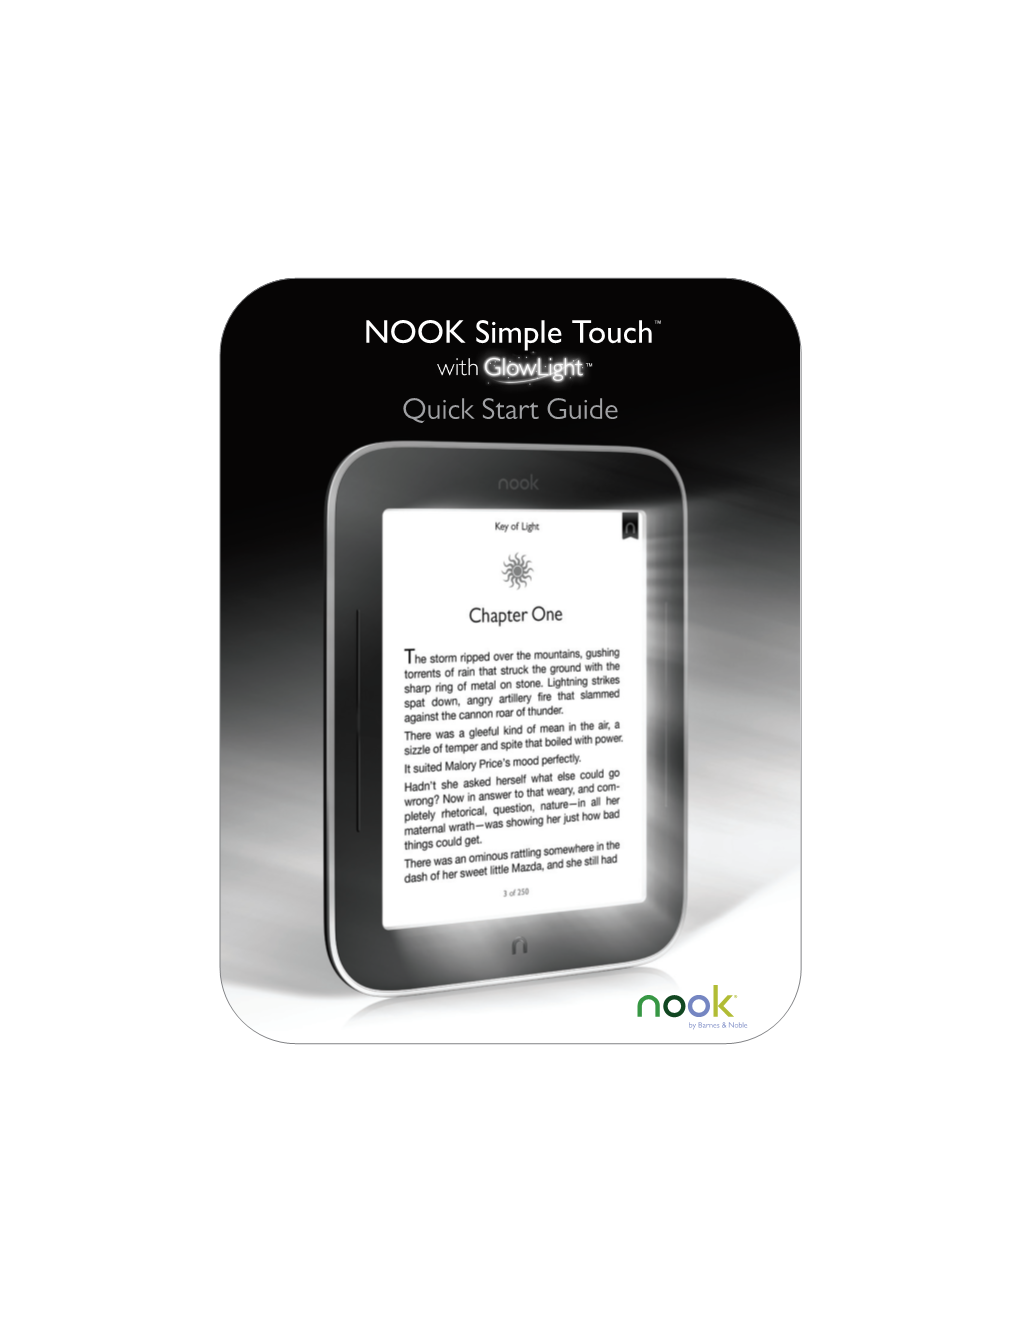 NOOK Simple Touch™ with Glowlight™ Quick Start Guide Charge Your NOOK® 1 You Must Charge Your NOOK Before Using It the ﬁrst Time